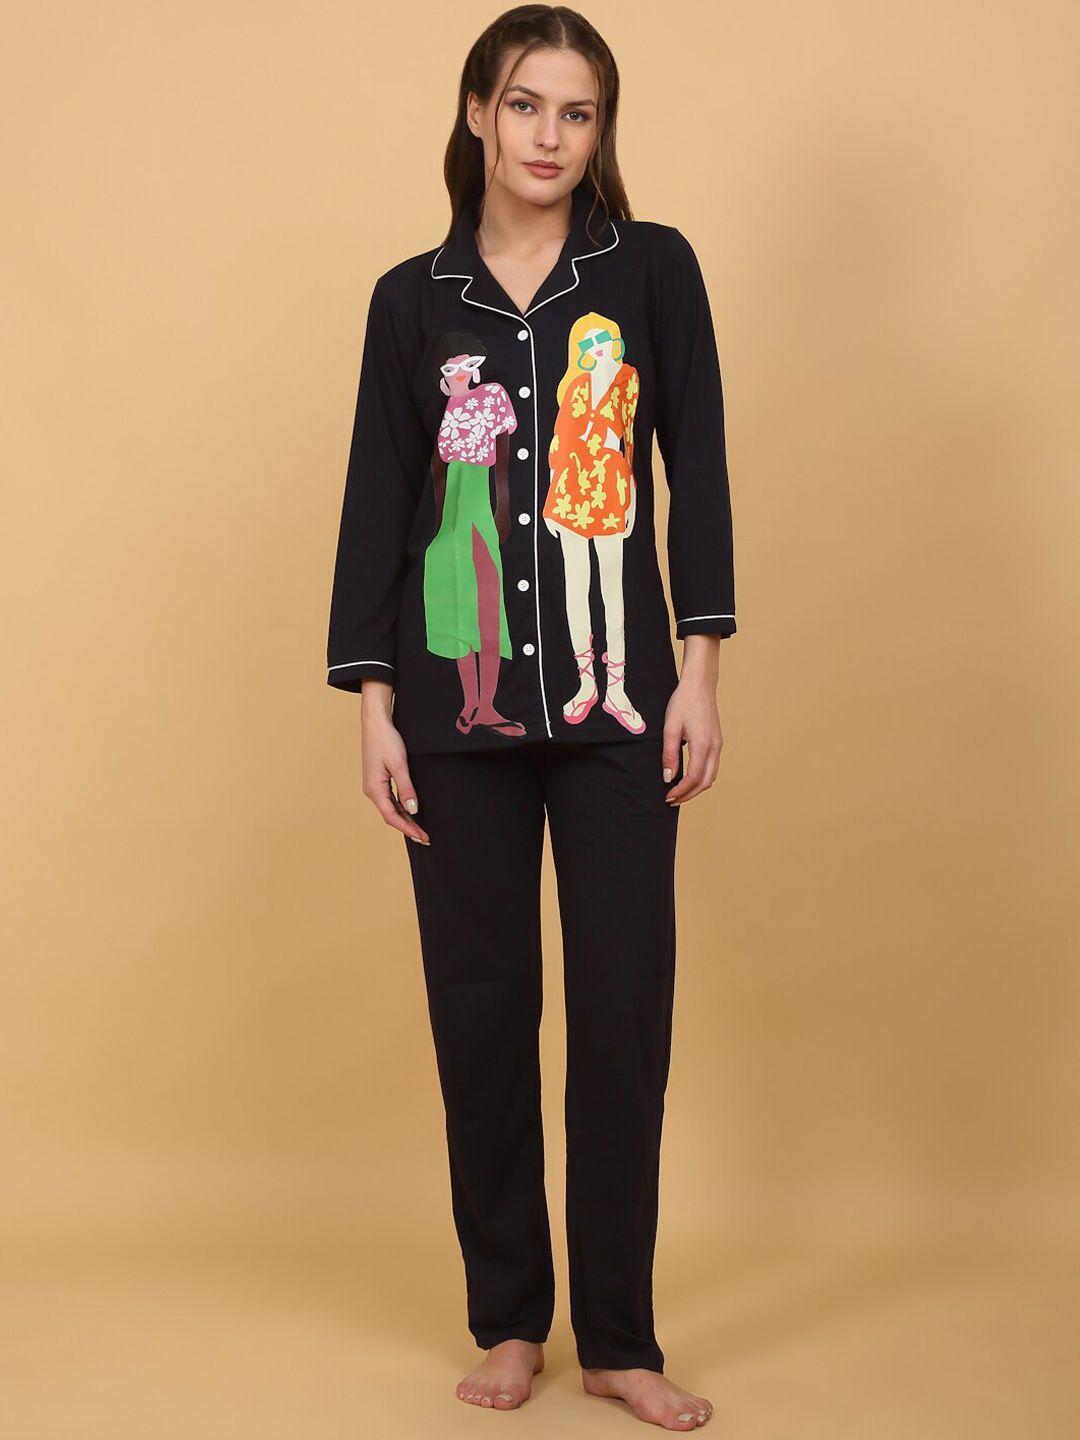 she-n-she-graphic-printed-lapel-collar-night-suit